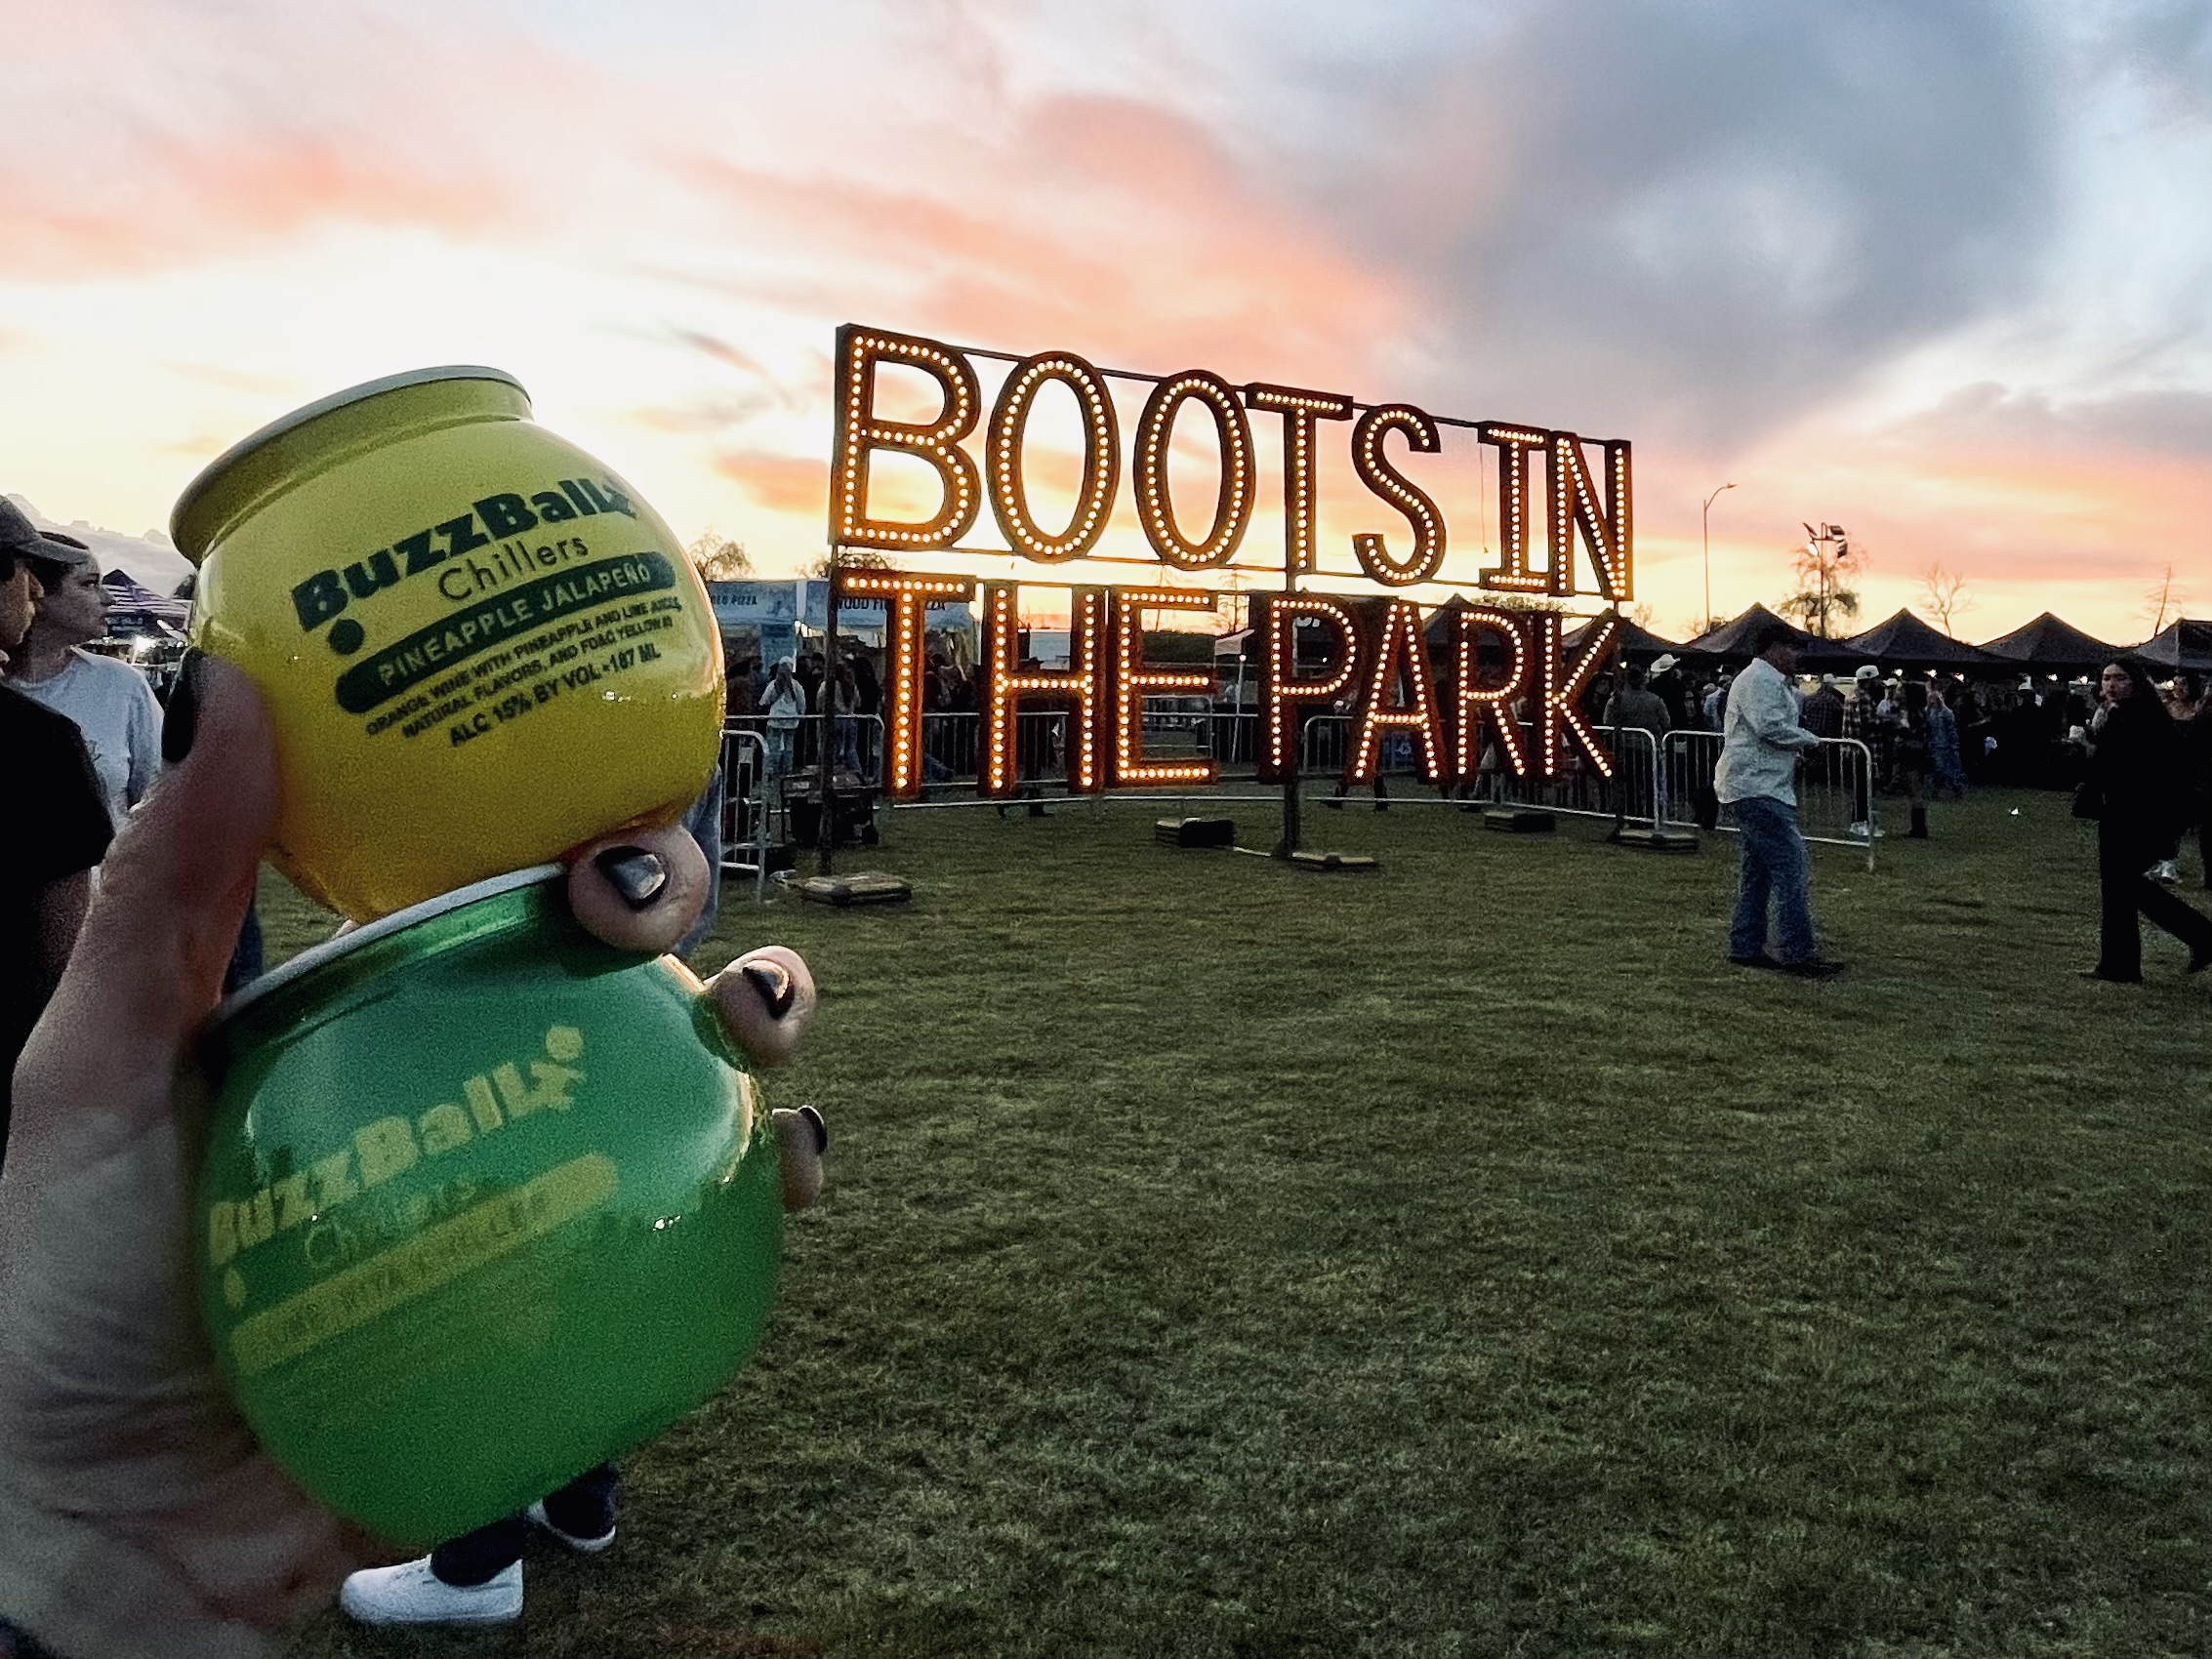 A festival-goer holds two BuzzBallz at a Boots in the Park country music festival put on by Activated Events.